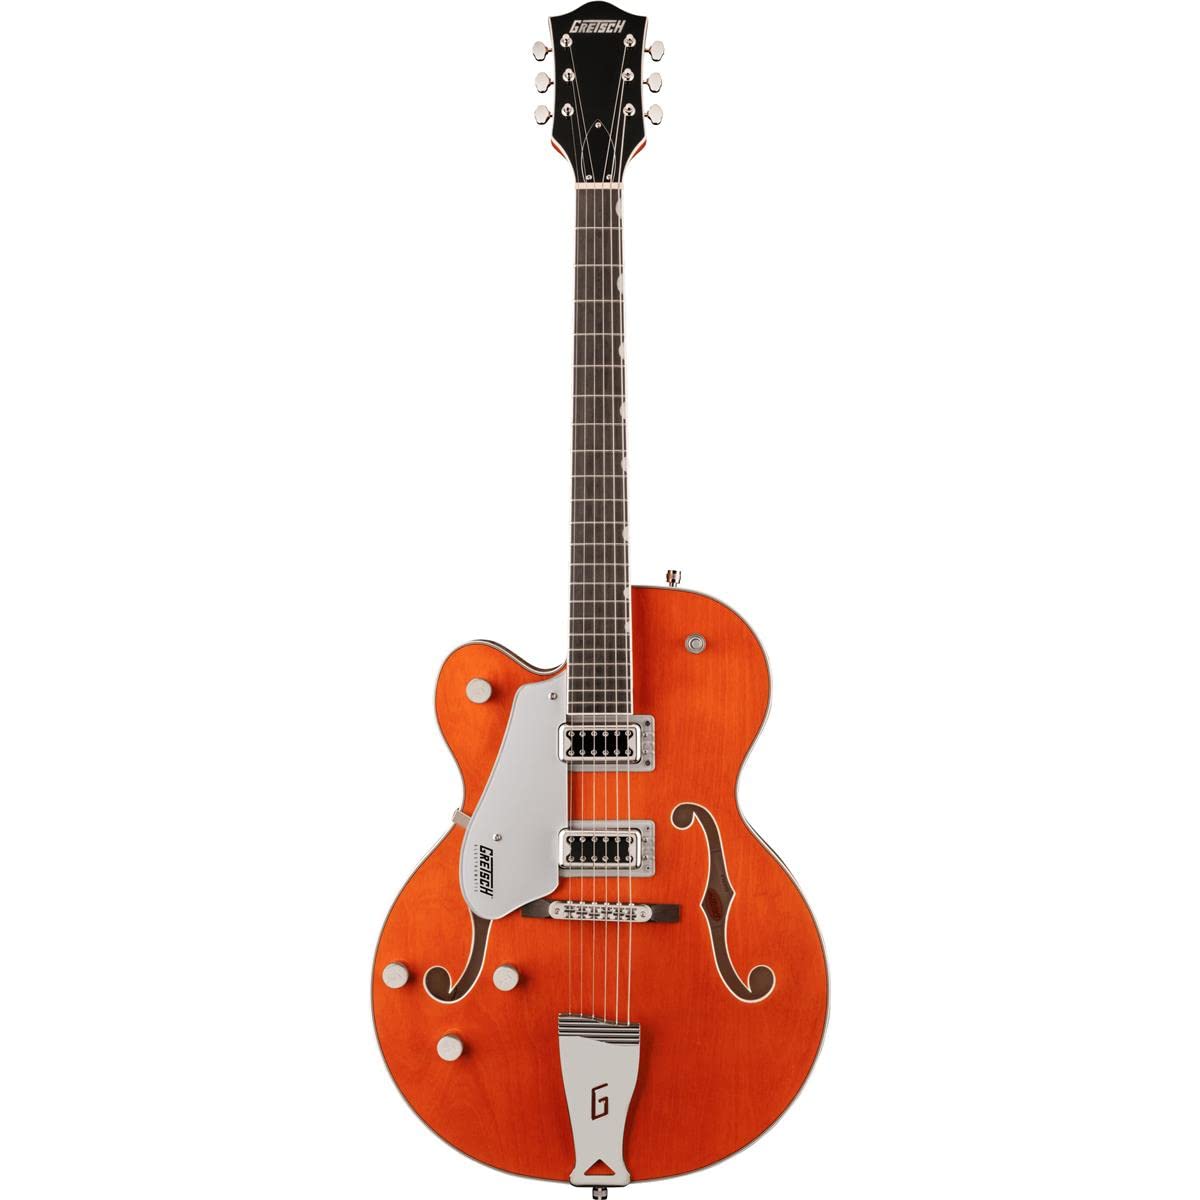 Gretsch G5420LH Electromatic Classic Hollowbody Single-cut Left-handed Electric Guitar - Orange Stain